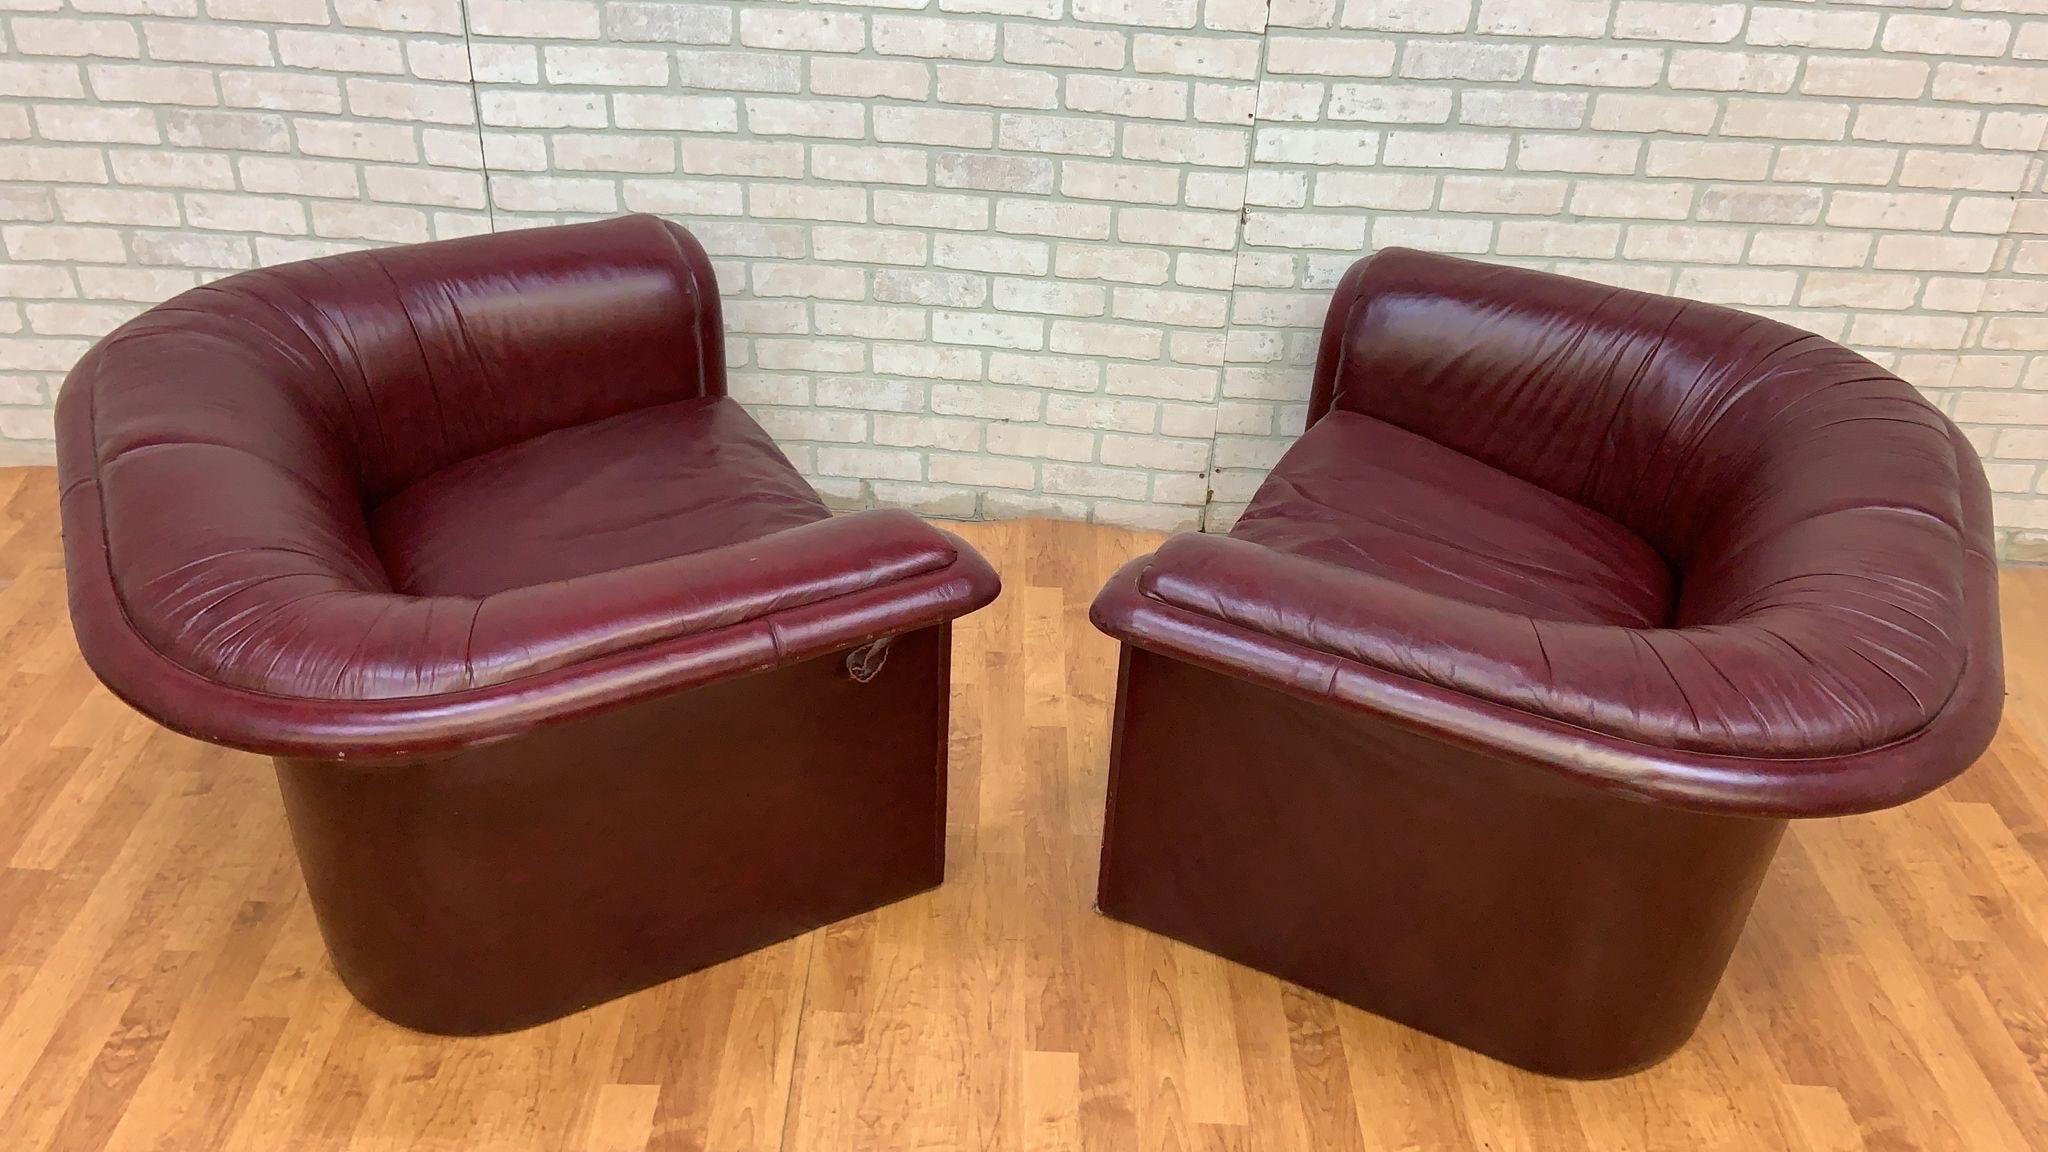 MCM Oversized Flare-Arm Leather Lounges by Dennis Christianson for Dunbar For Sale 2